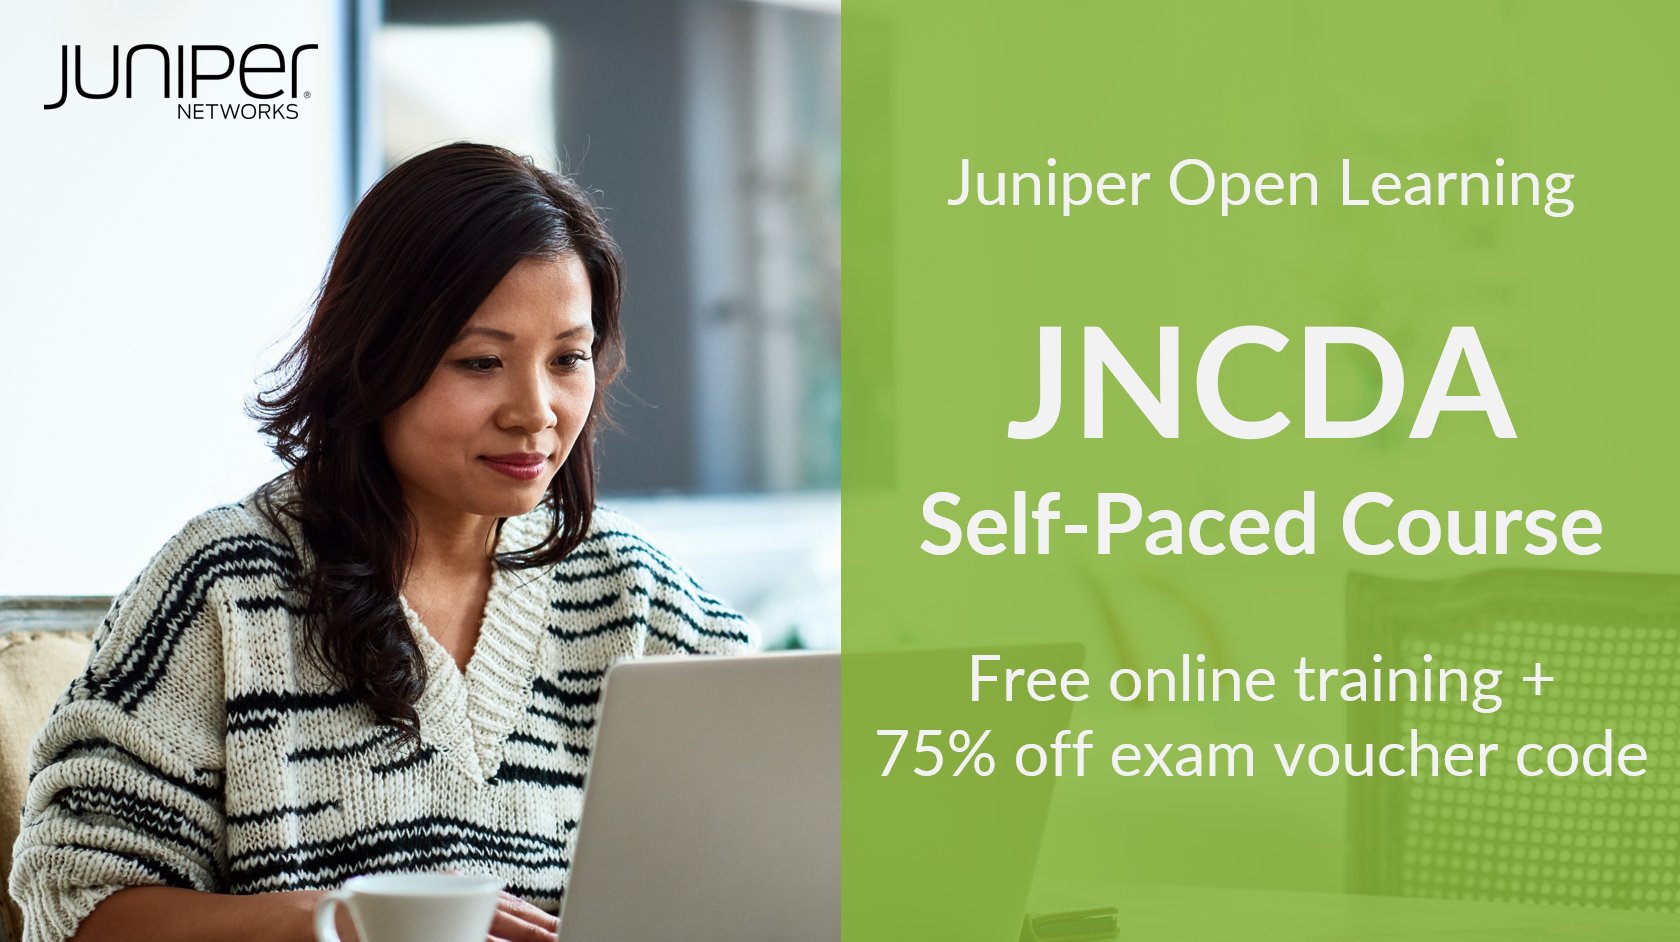 Juniper networking training caresource low premium silver offered by caresource